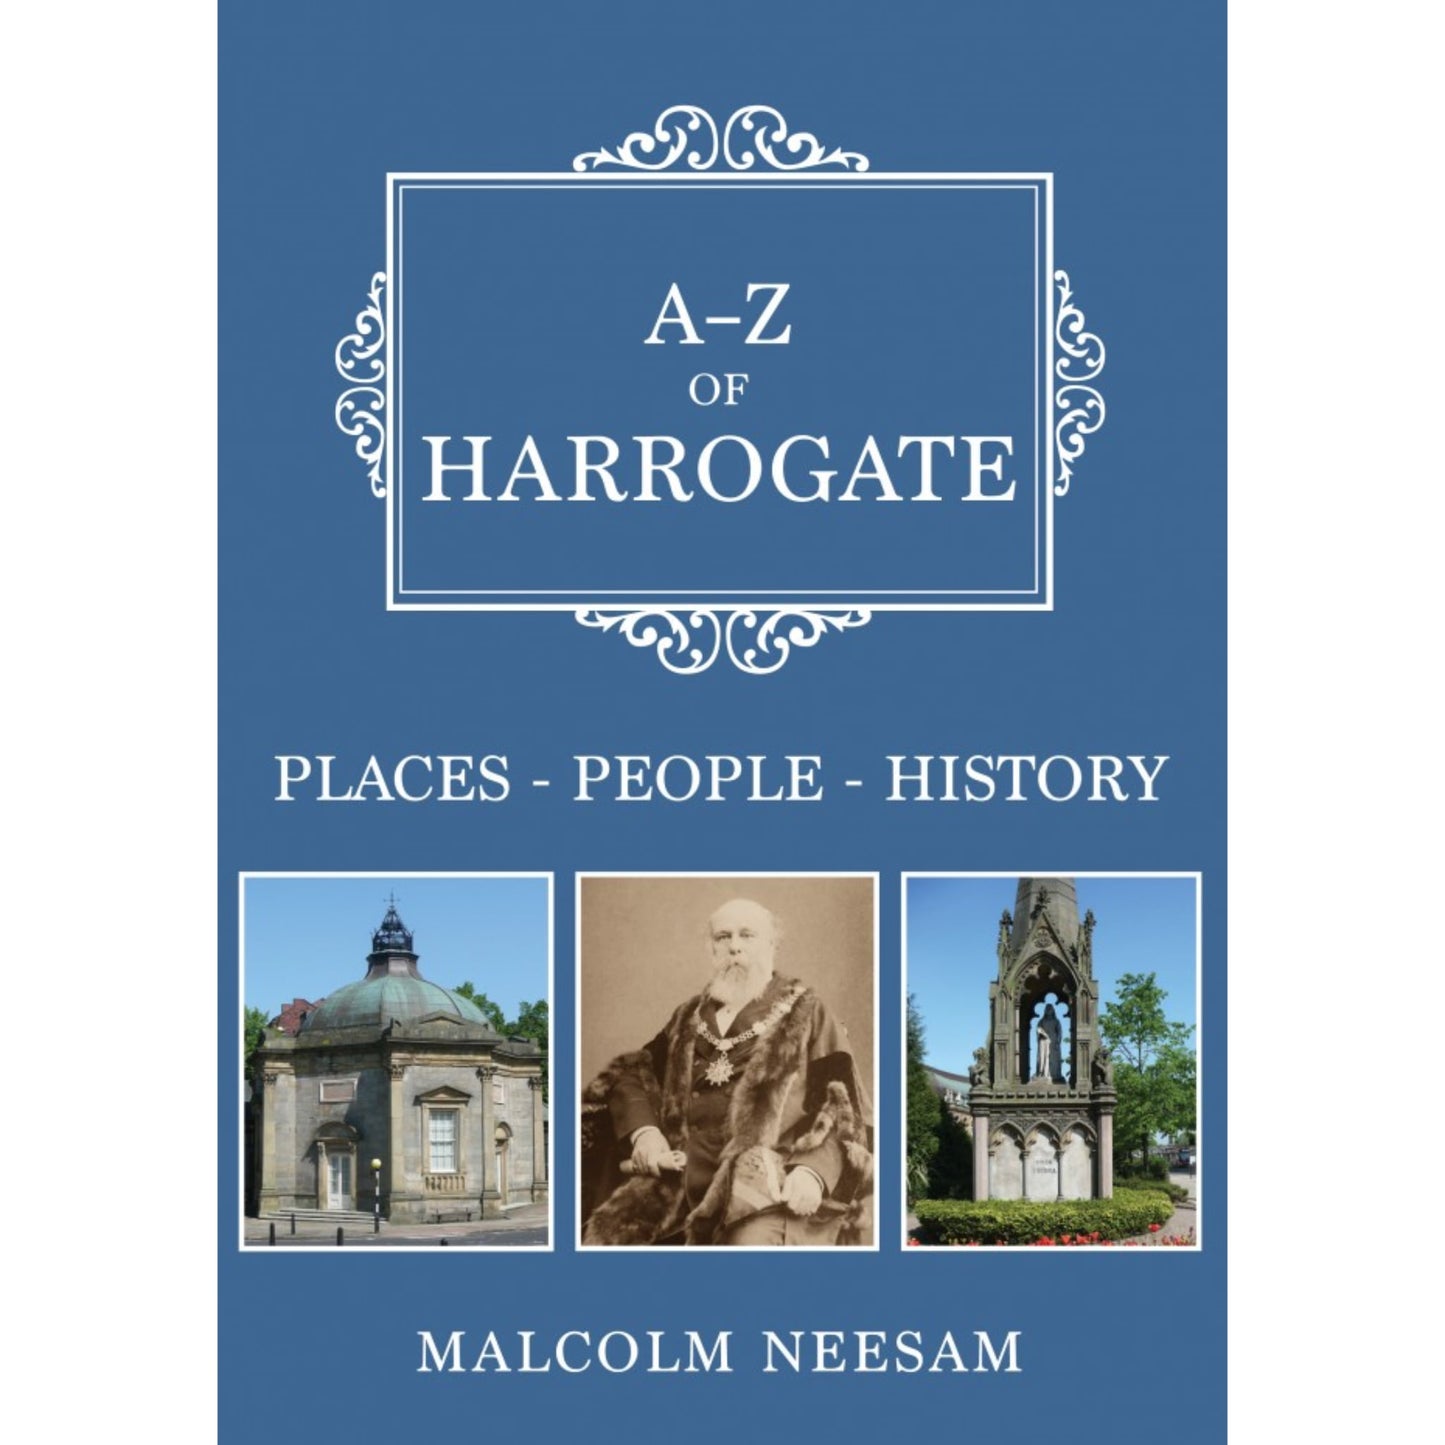 Load image into Gallery viewer, A-Z of Harrogate Book - The Great Yorkshire Shop
